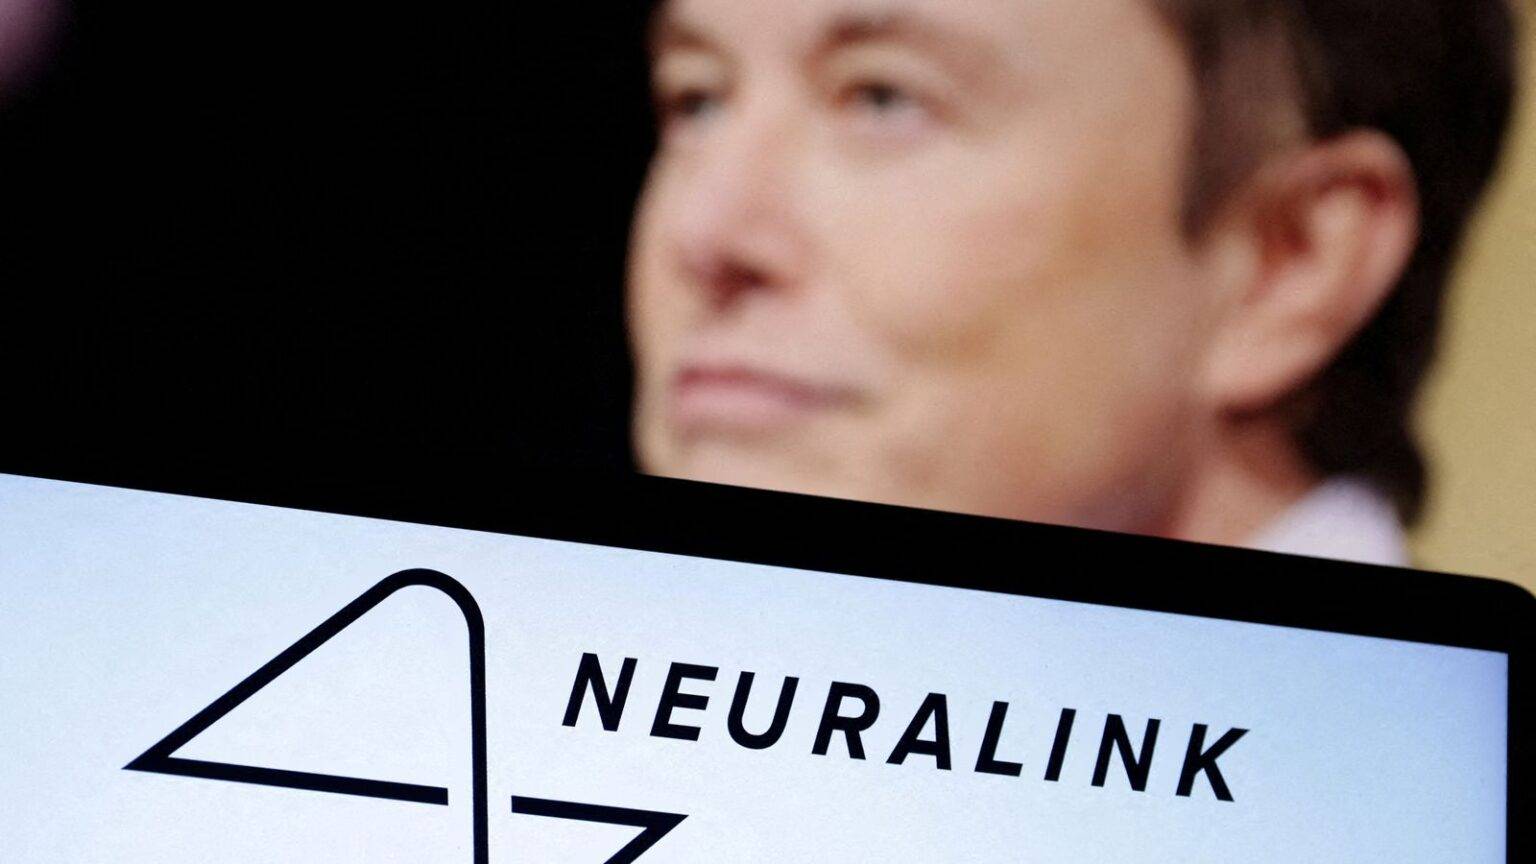 Elon Musk says first brain chip human can move a mouse around screen by thinking